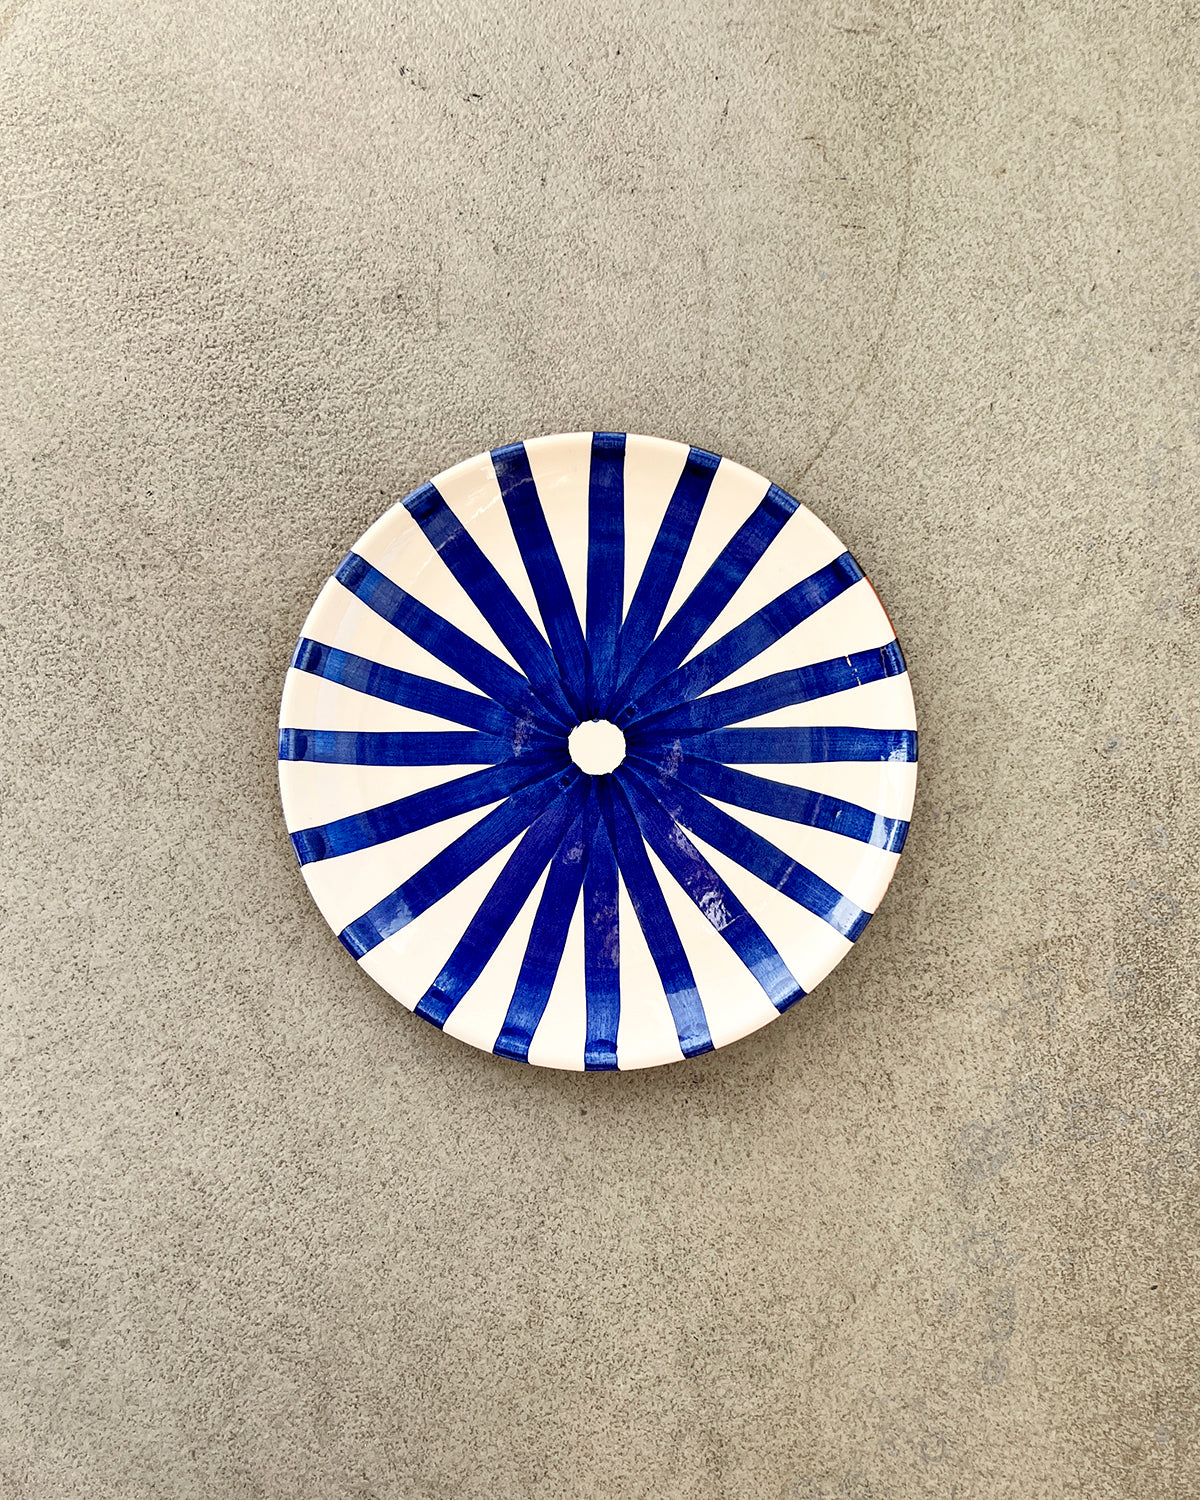 Casa Cubista Ray Pattern Plates in Blue